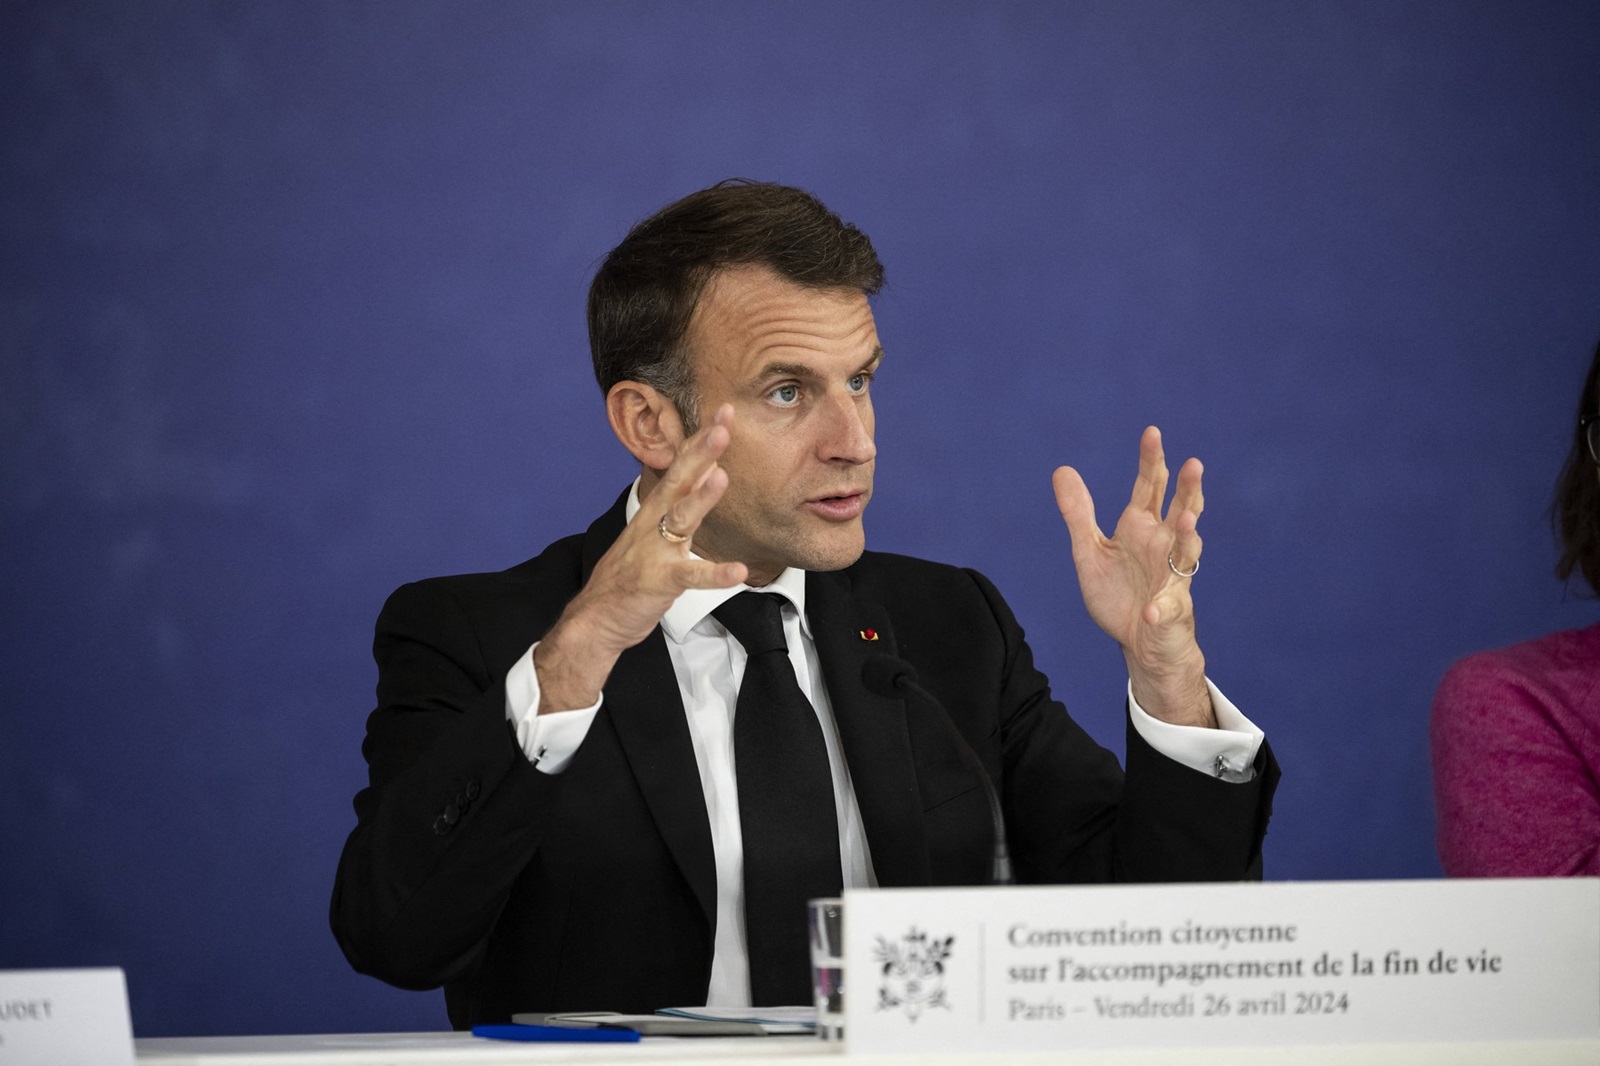 France's President Emmanuel Macron gestures during the final seminar of the End-of-Life Convention at the Economic, Social and Environmental Council (CESE) in Paris on April 26, 2024.© Eliot Blondet/Pool/Bestimage,Image: 868317161, License: Rights-managed, Restrictions: , Model Release: no, Credit line: Eliot Blondet / Pool / Bestimage / Profimedia